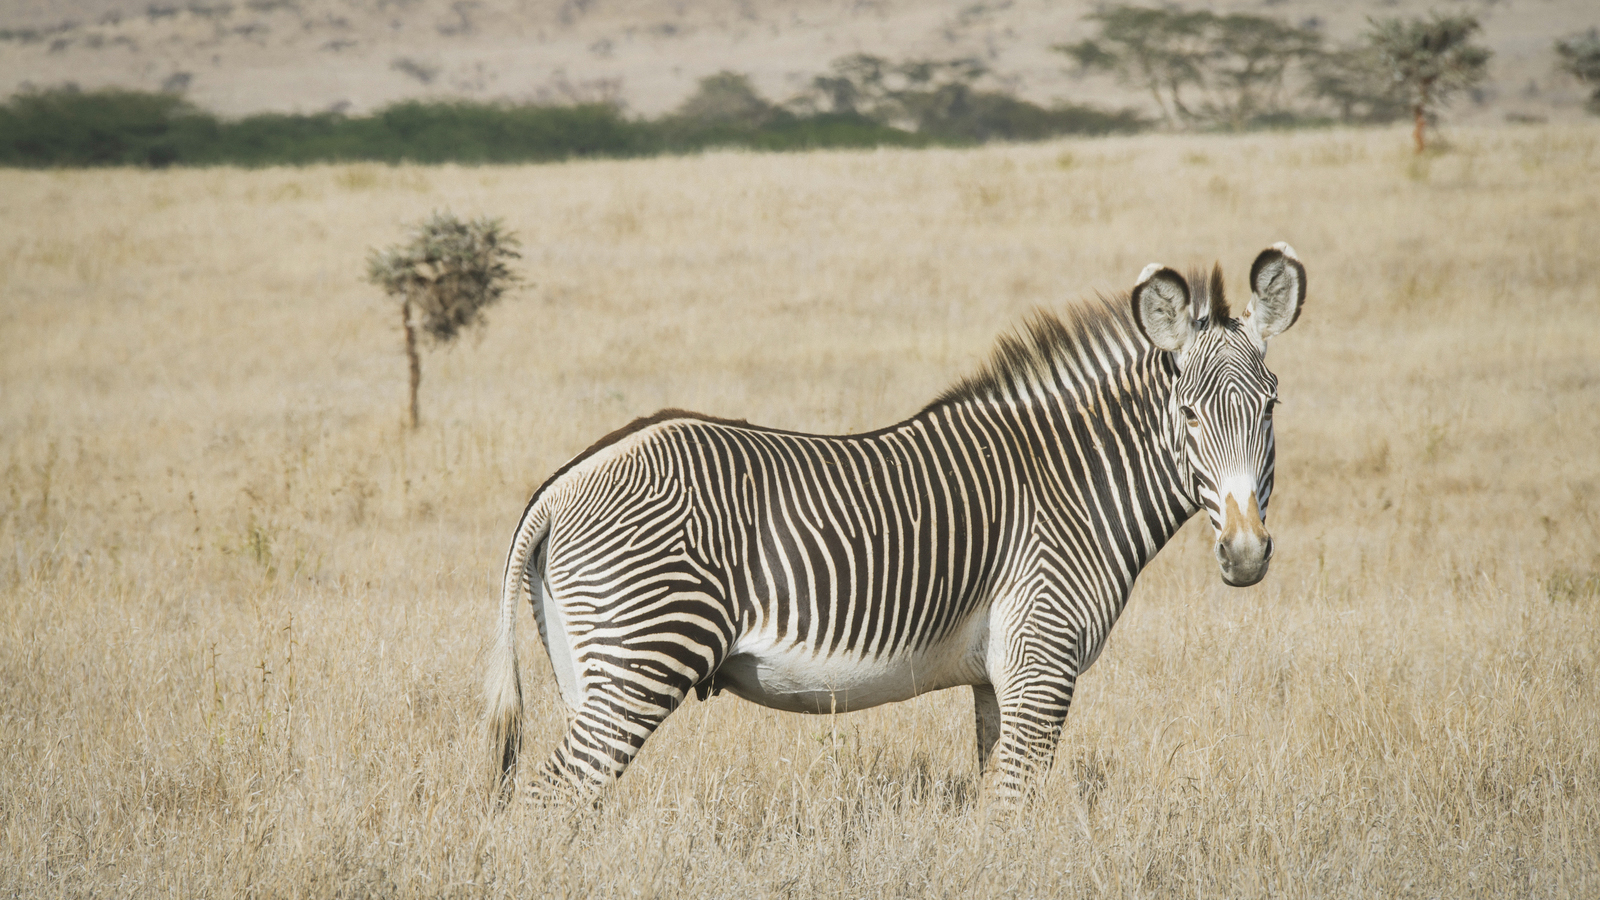 Endangered Grévy's zebra (Equus grevyi) at the Lewa Wildlife Conservancy in Northern Kenya. Lewa serves as a refuge for endangered species and a catalyst for conservation through its development programs for adjoining communities. Photo © Ami Vitale for The Nature Conservancy